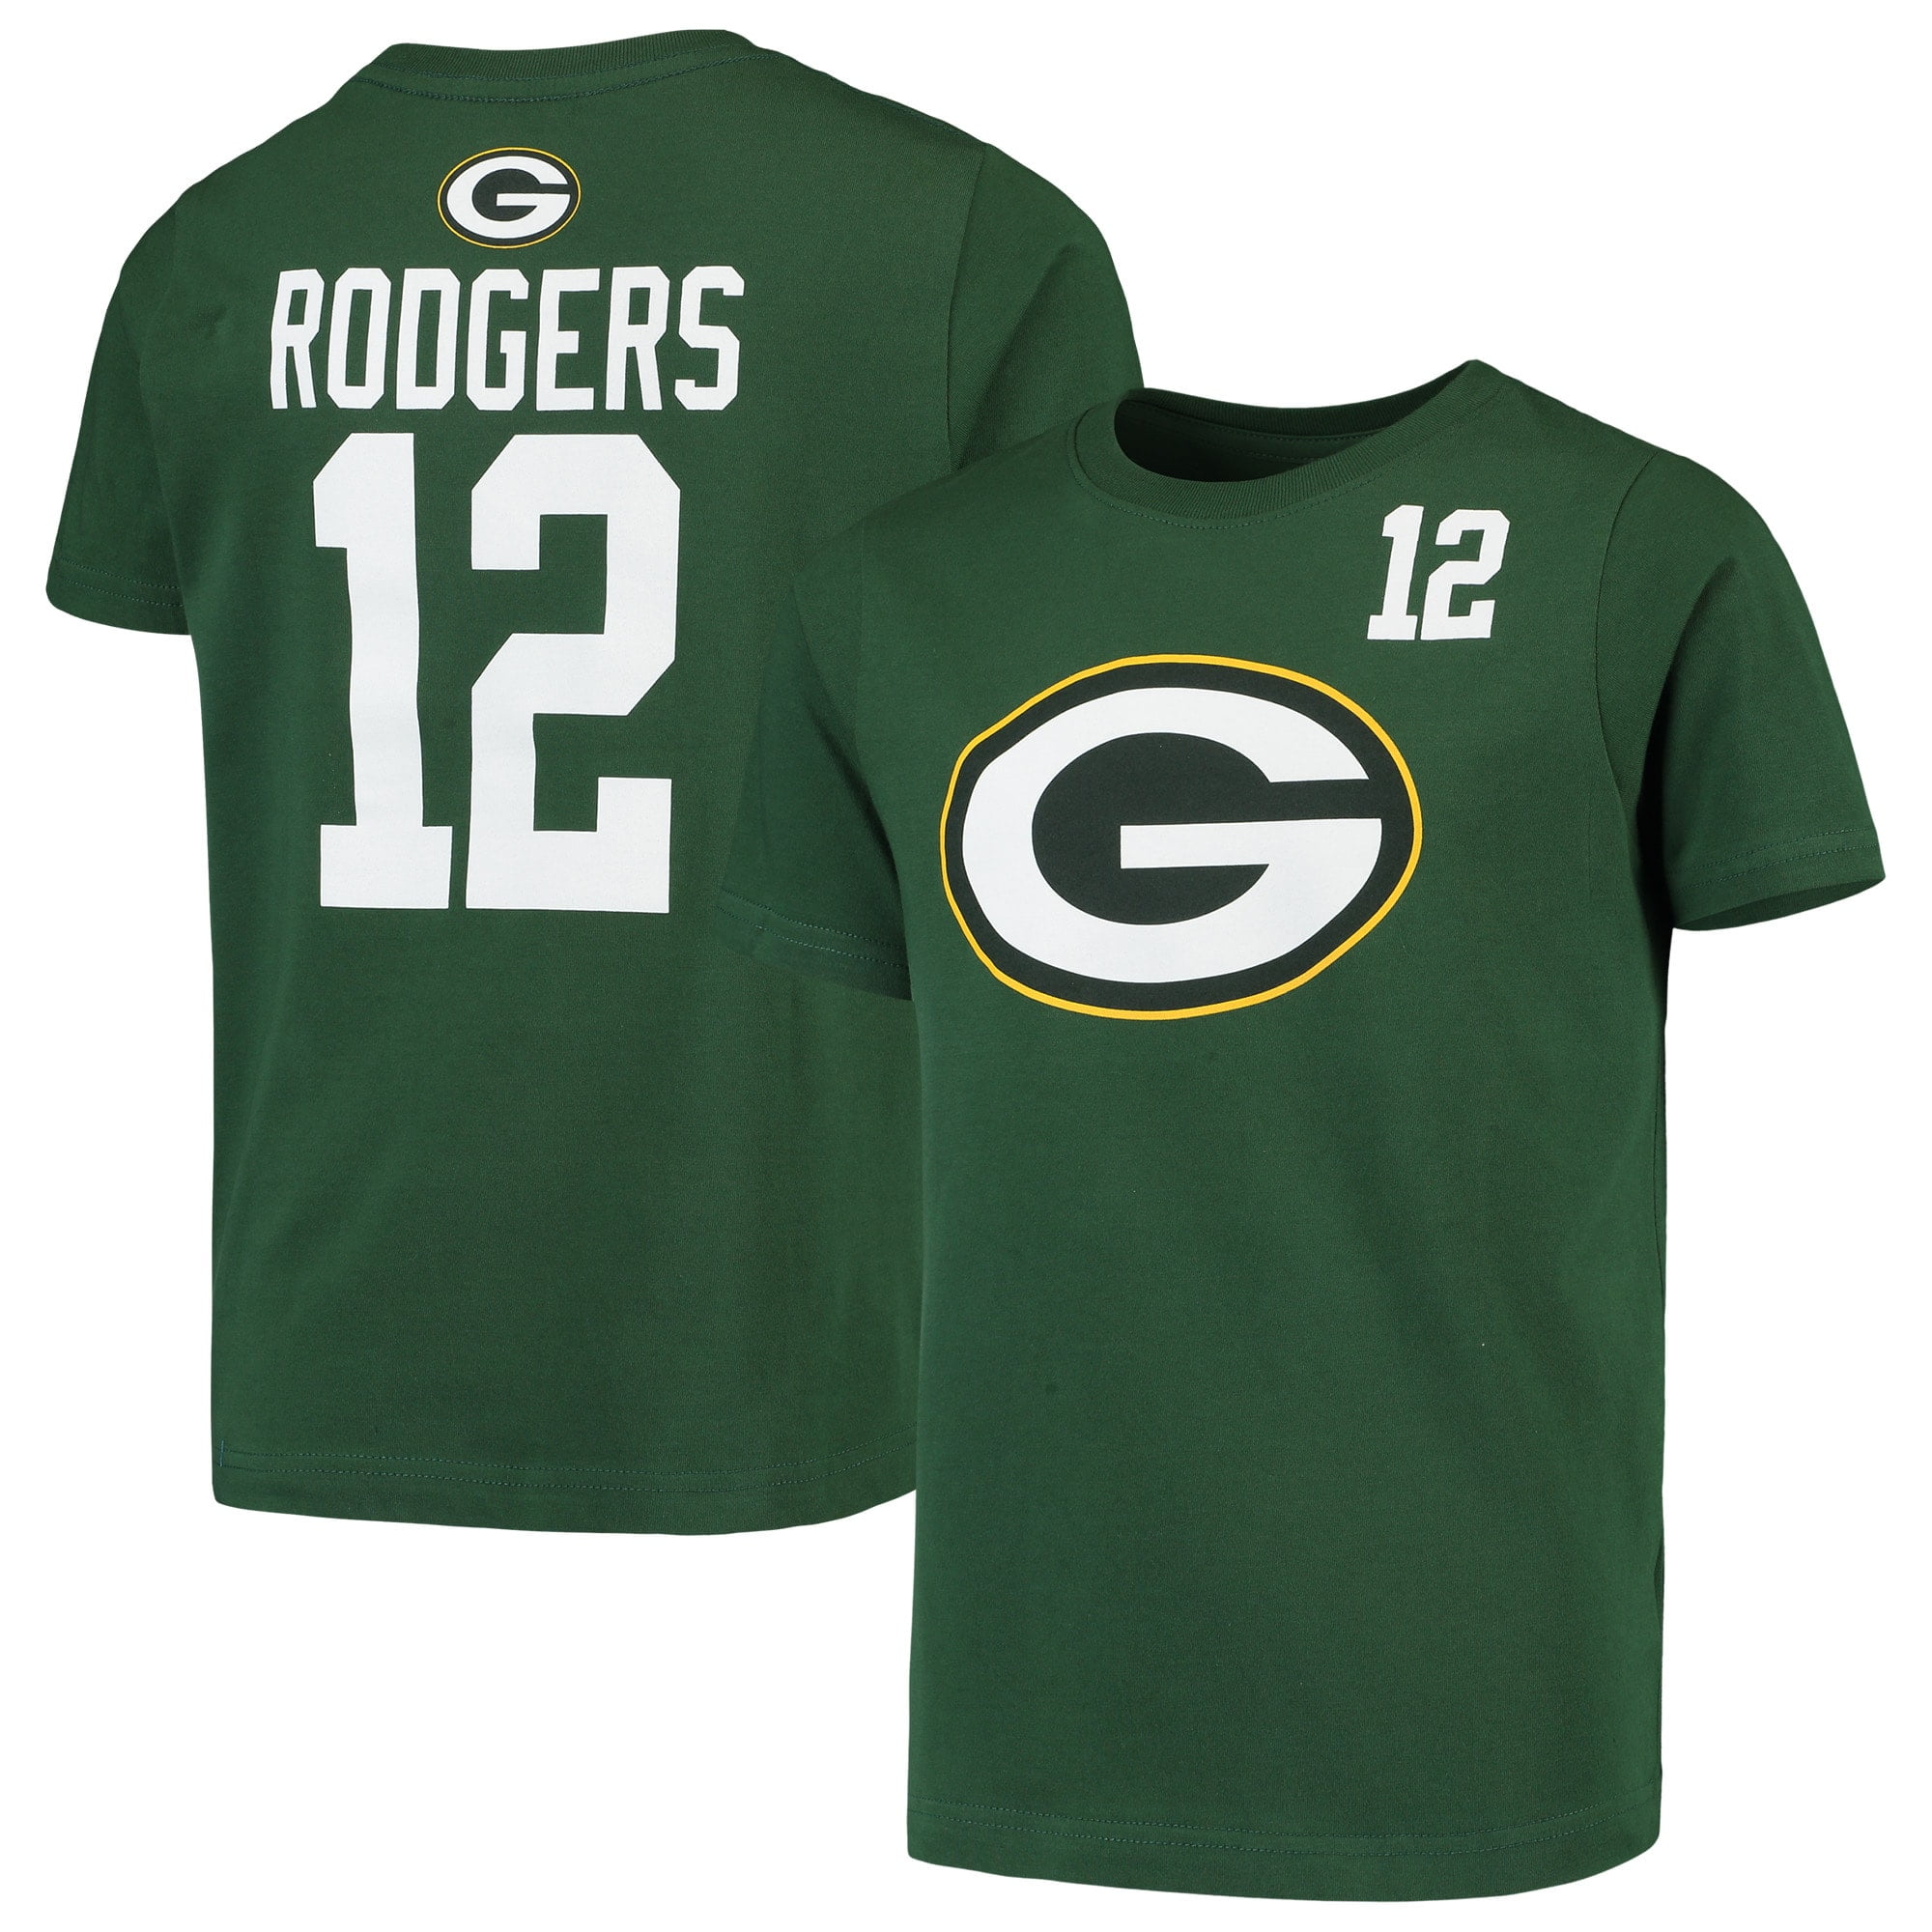 rodgers that shirt